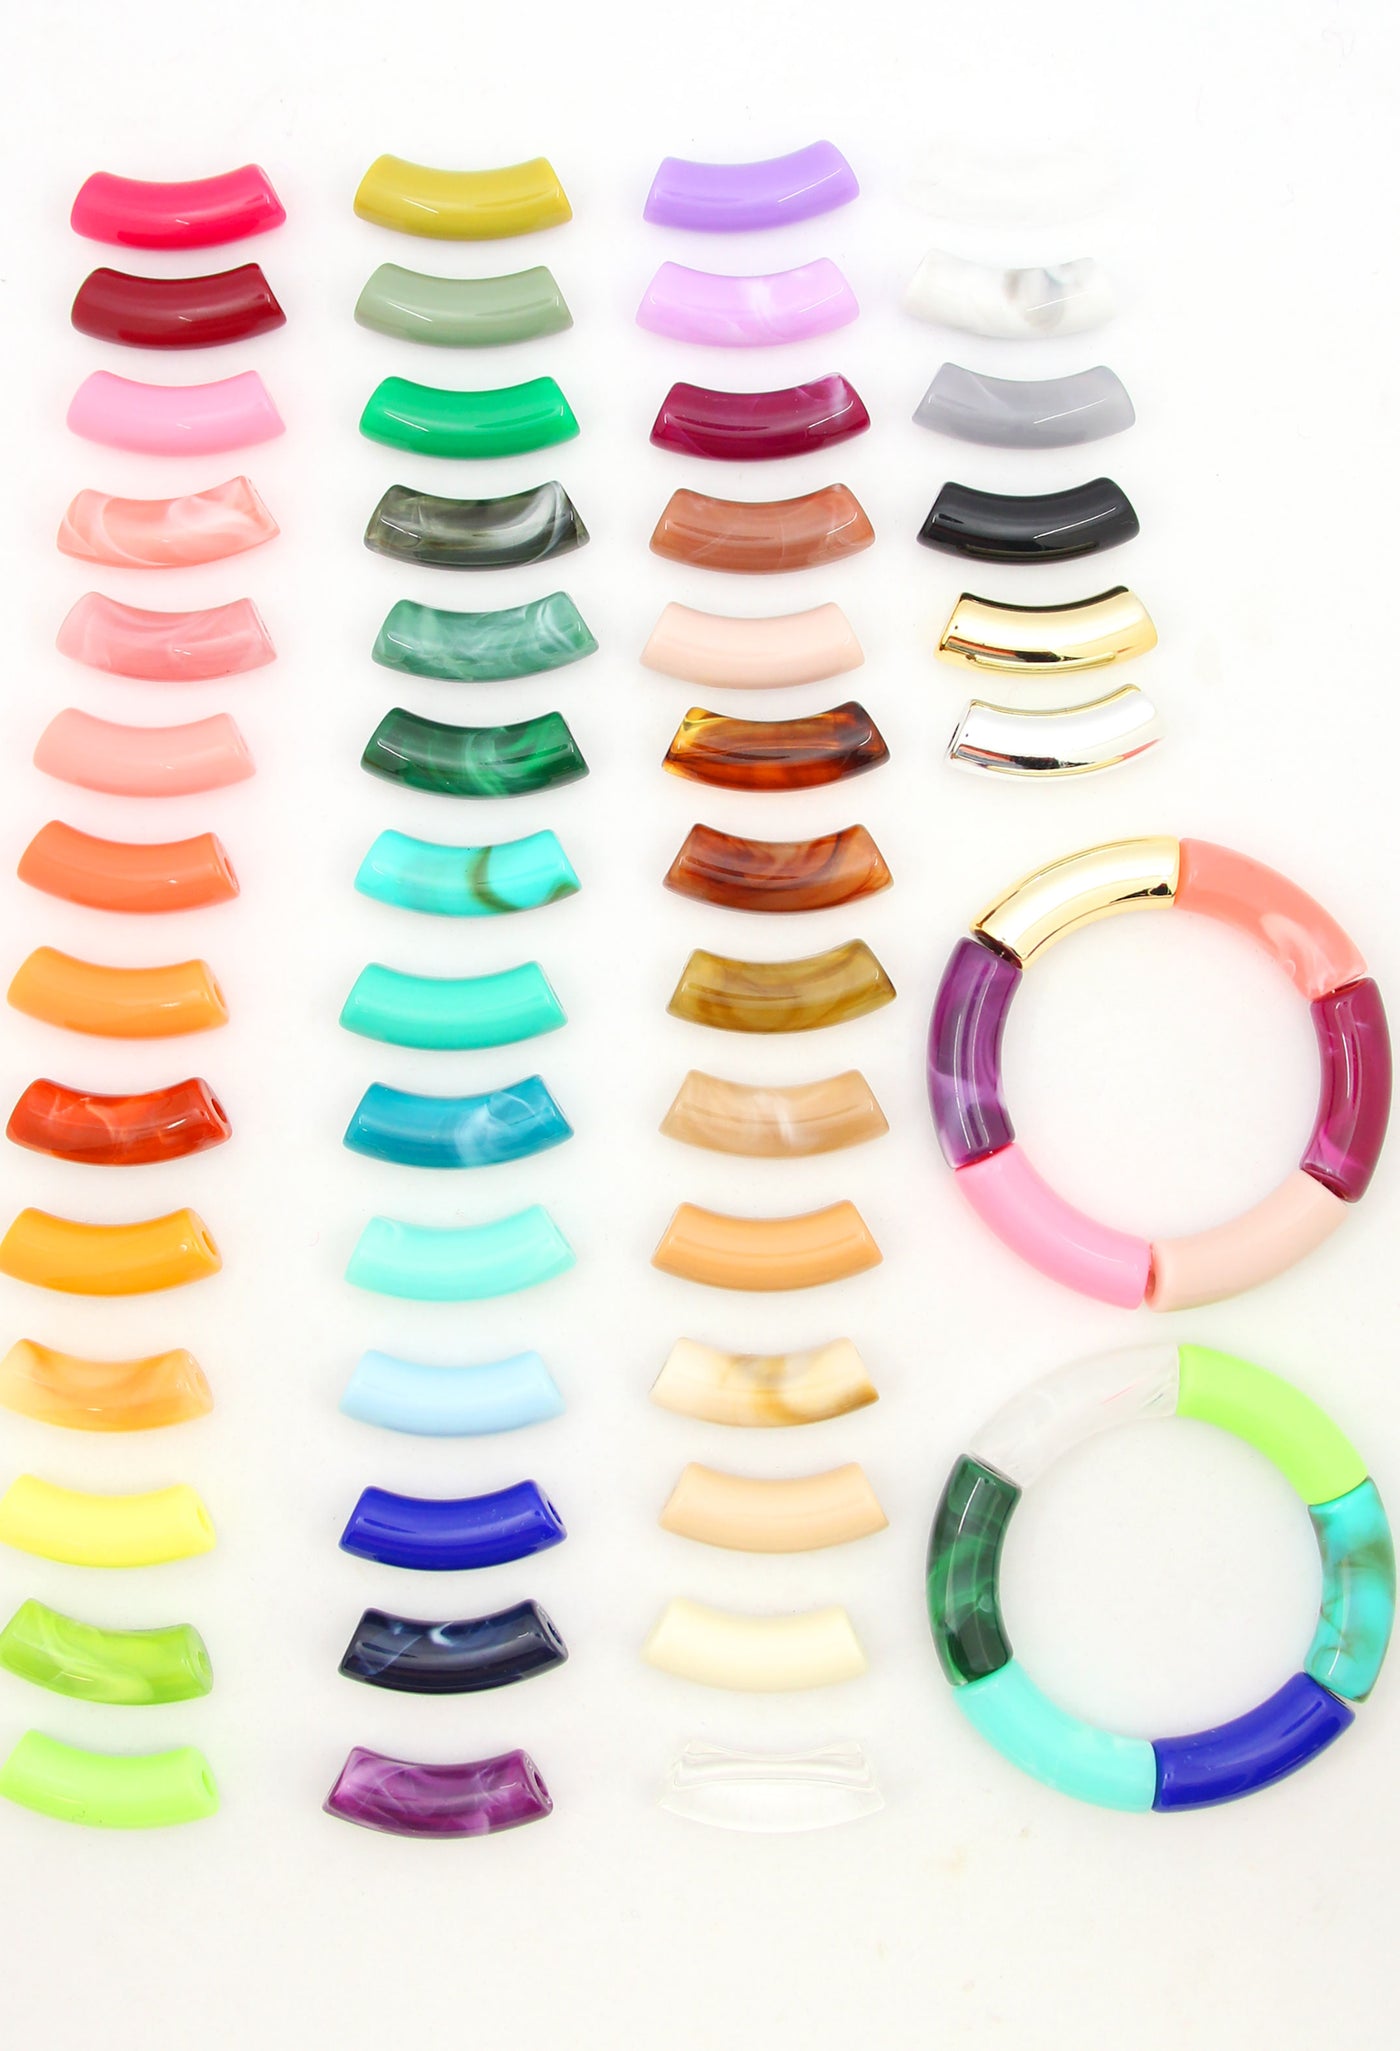 120PCS Bamboo Tube Bracelet Making Kit for Women Friendship Gift Stacking  Bangles Chunky Curved Acrylic Beads Metal Spacers Elastic Thread